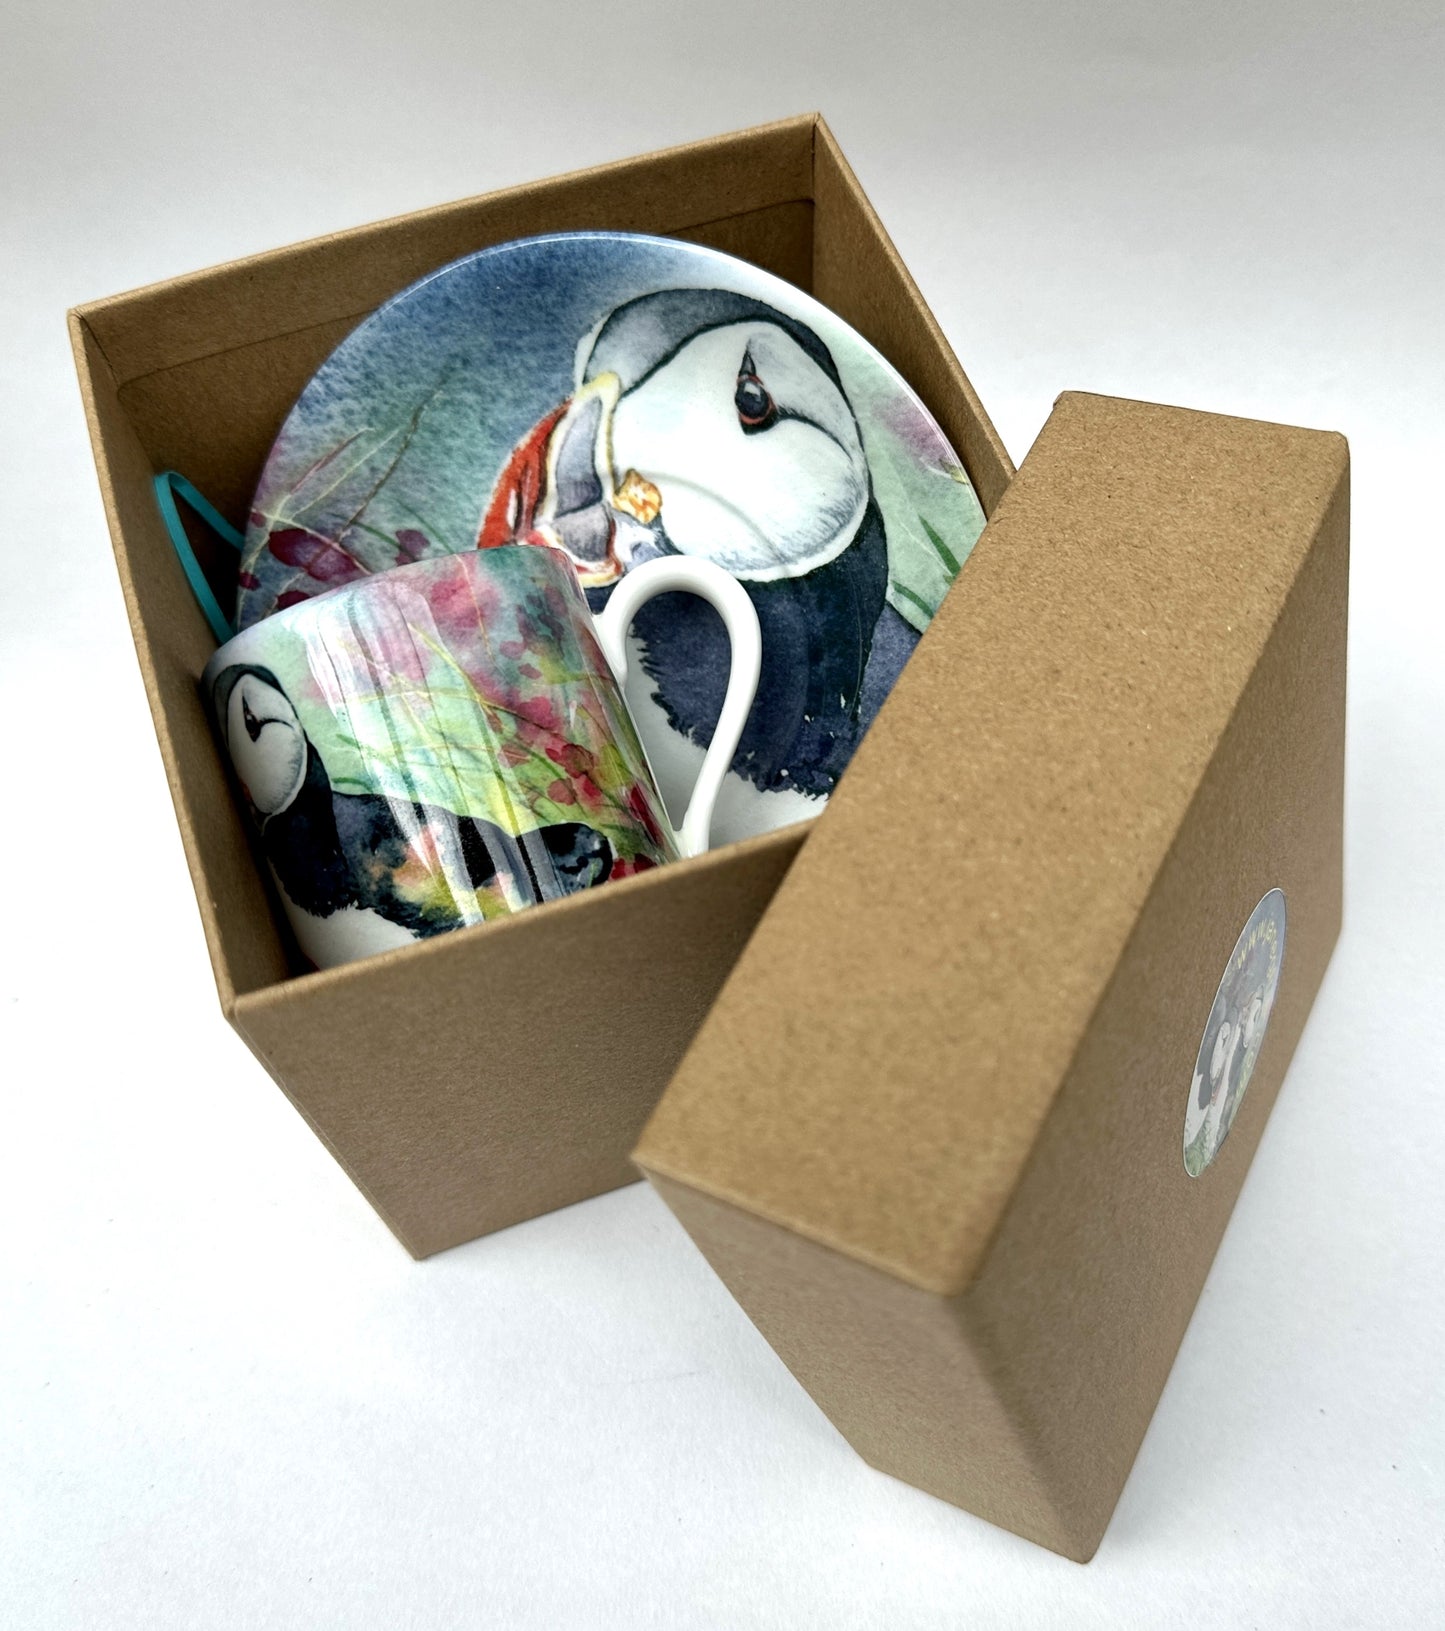 expresso set printed with a watercolour painting of two puffins in a cardboard box with lid